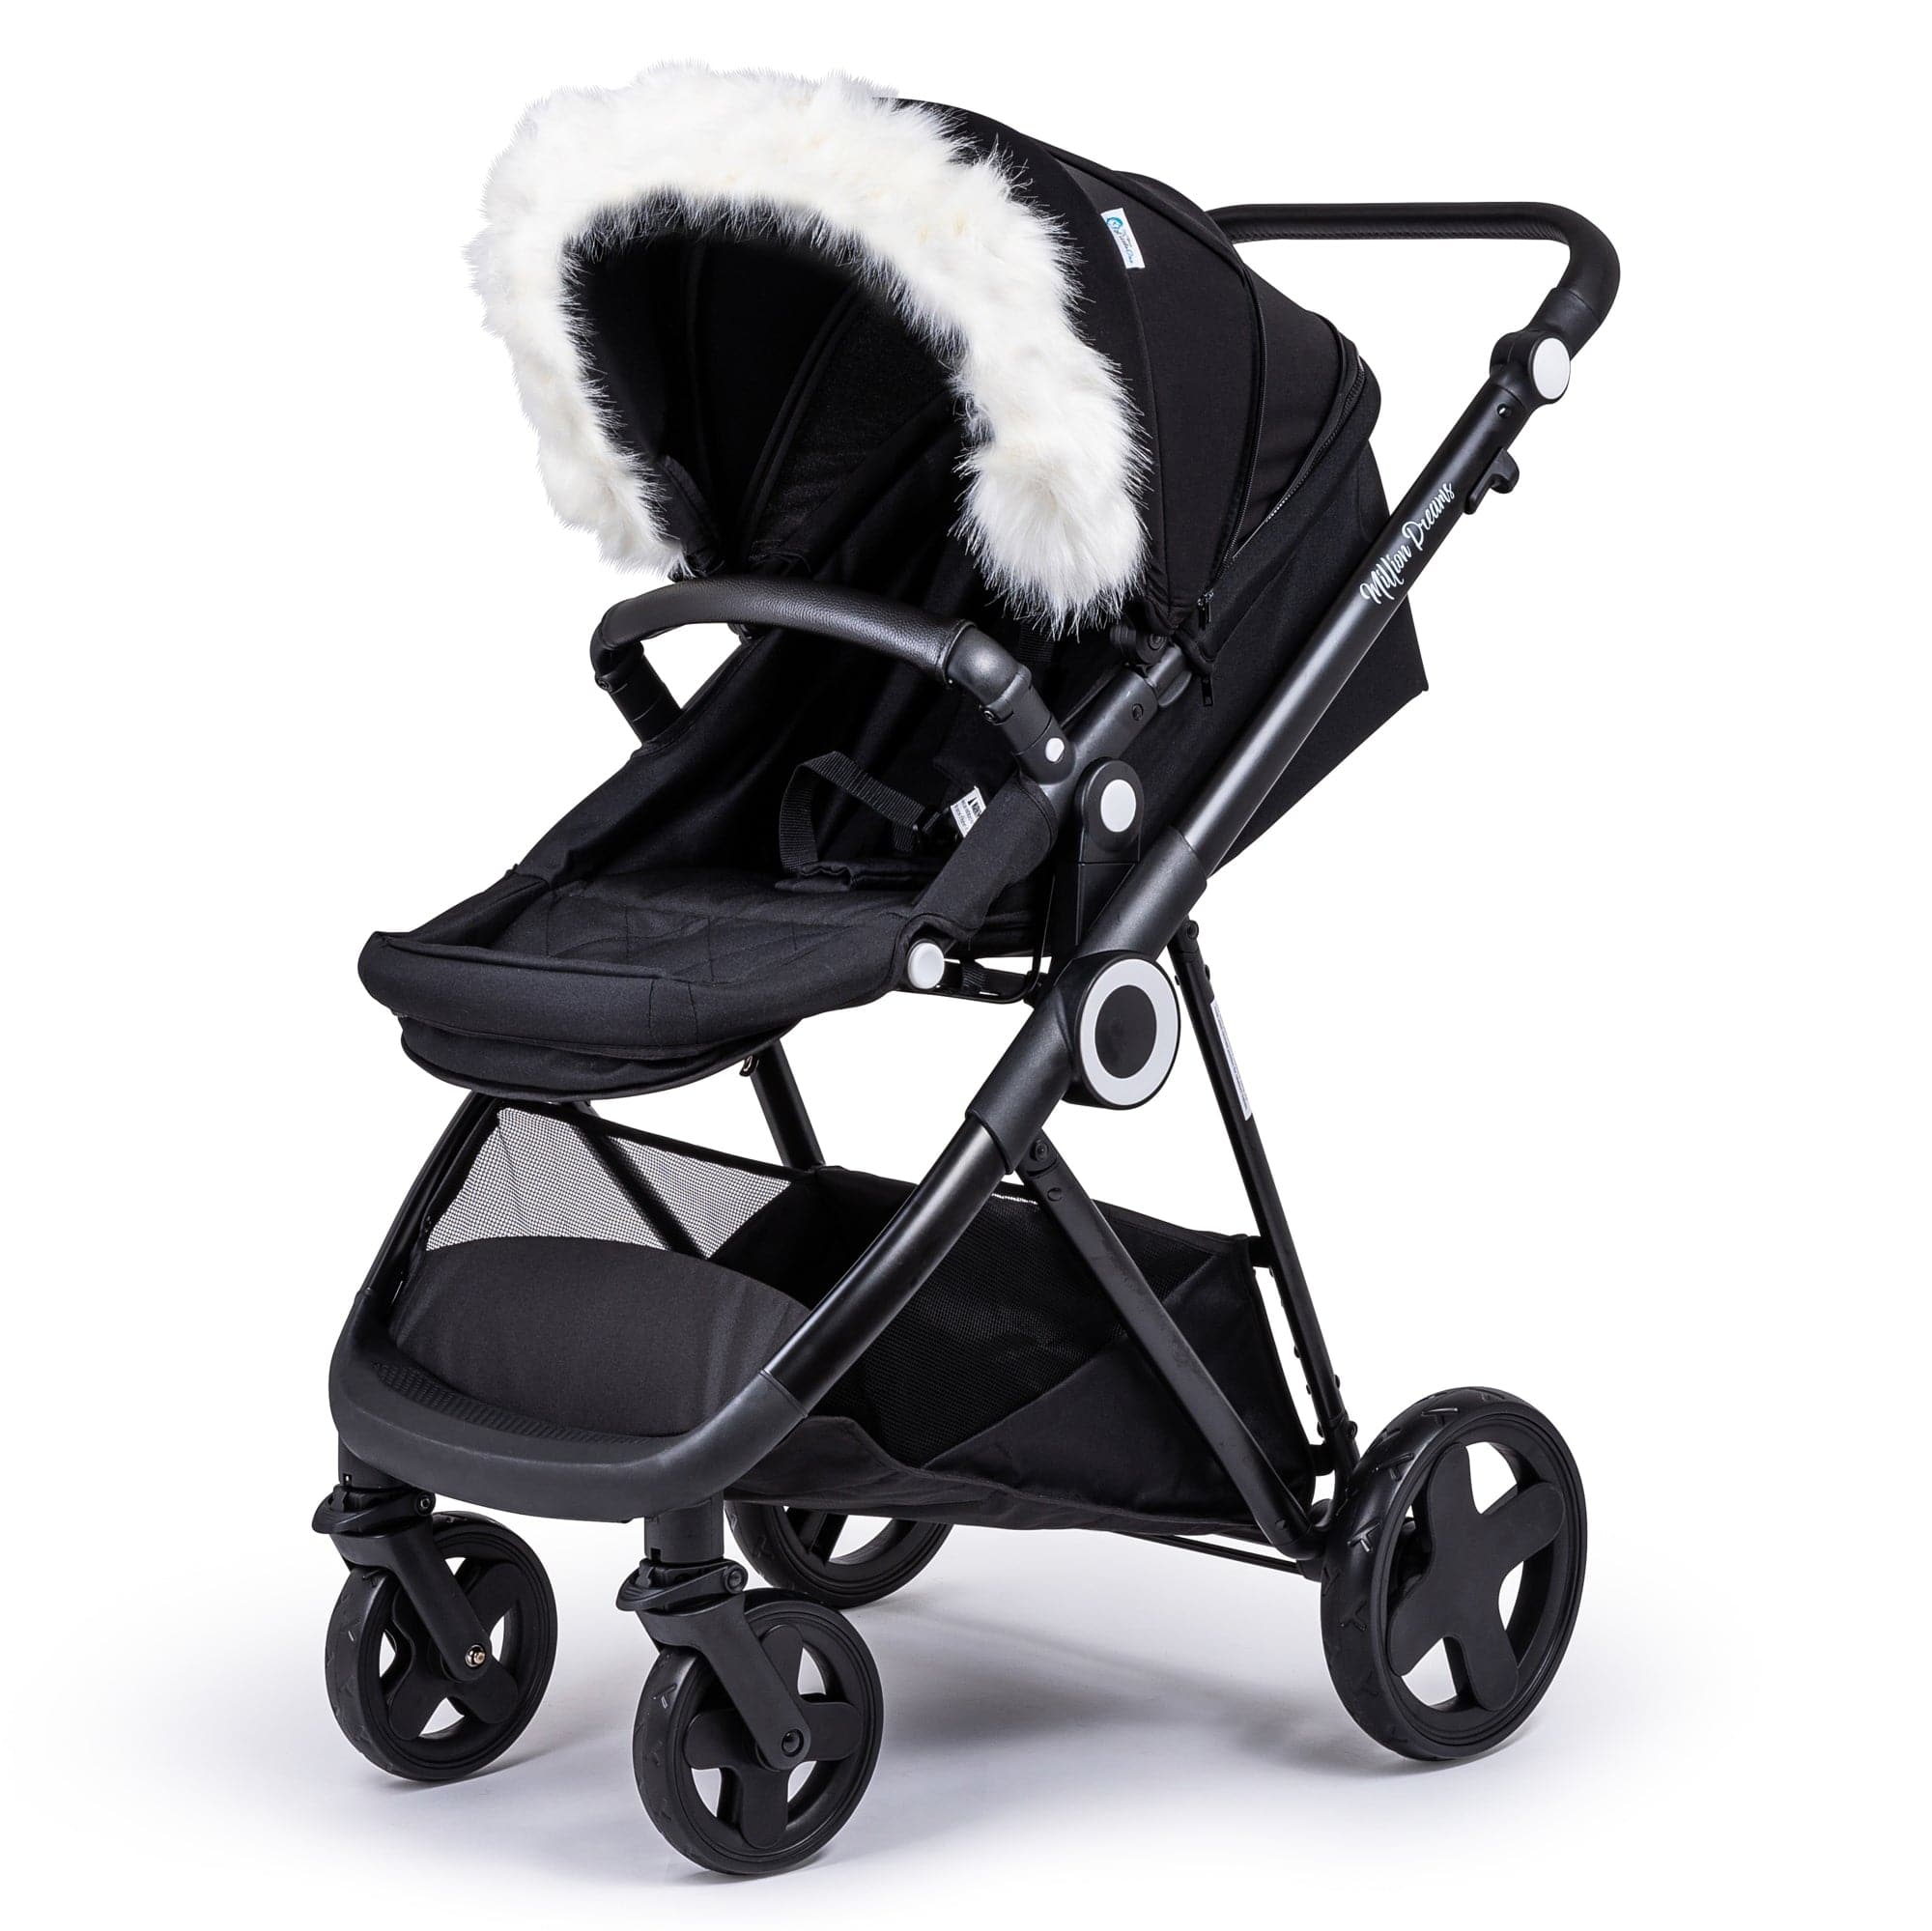 Pram Fur Hood Trim Attachment For Pushchair Compatible with Nuna - For Your Little One